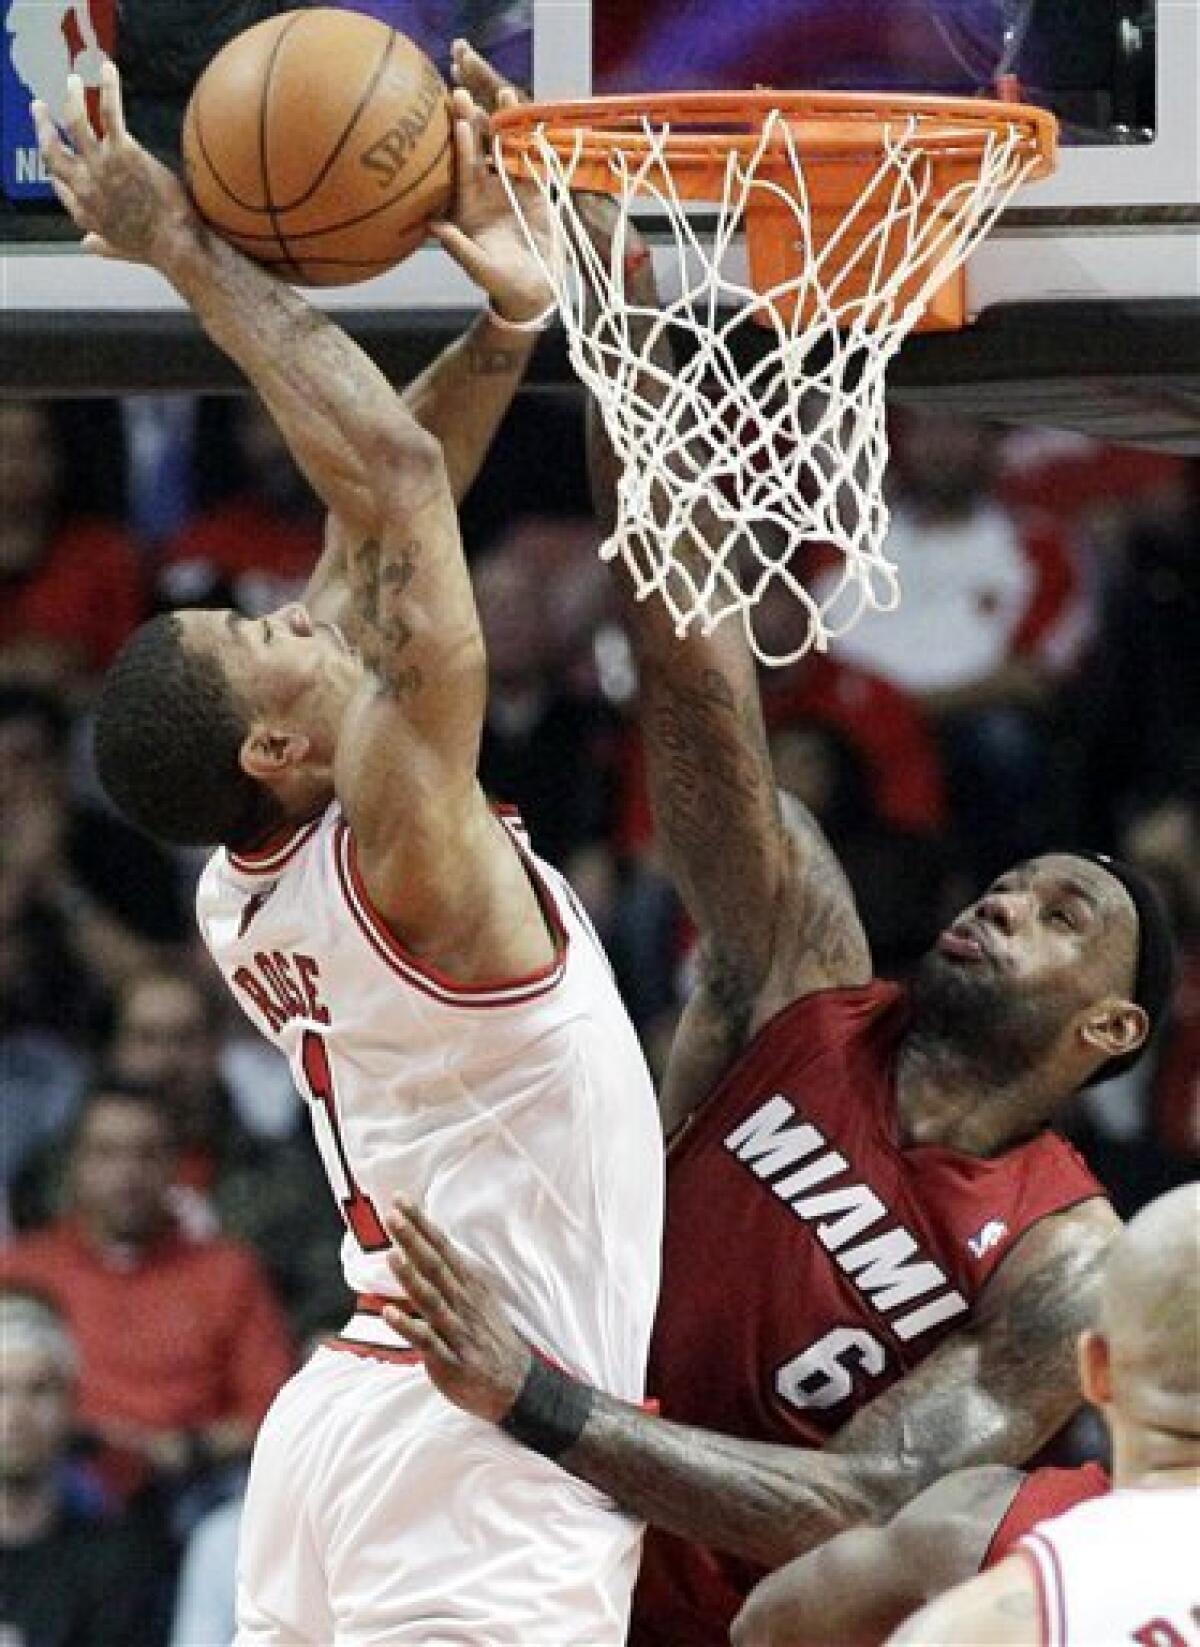 The Miami Heat's LeBron James (6) is tied up in the paint by the